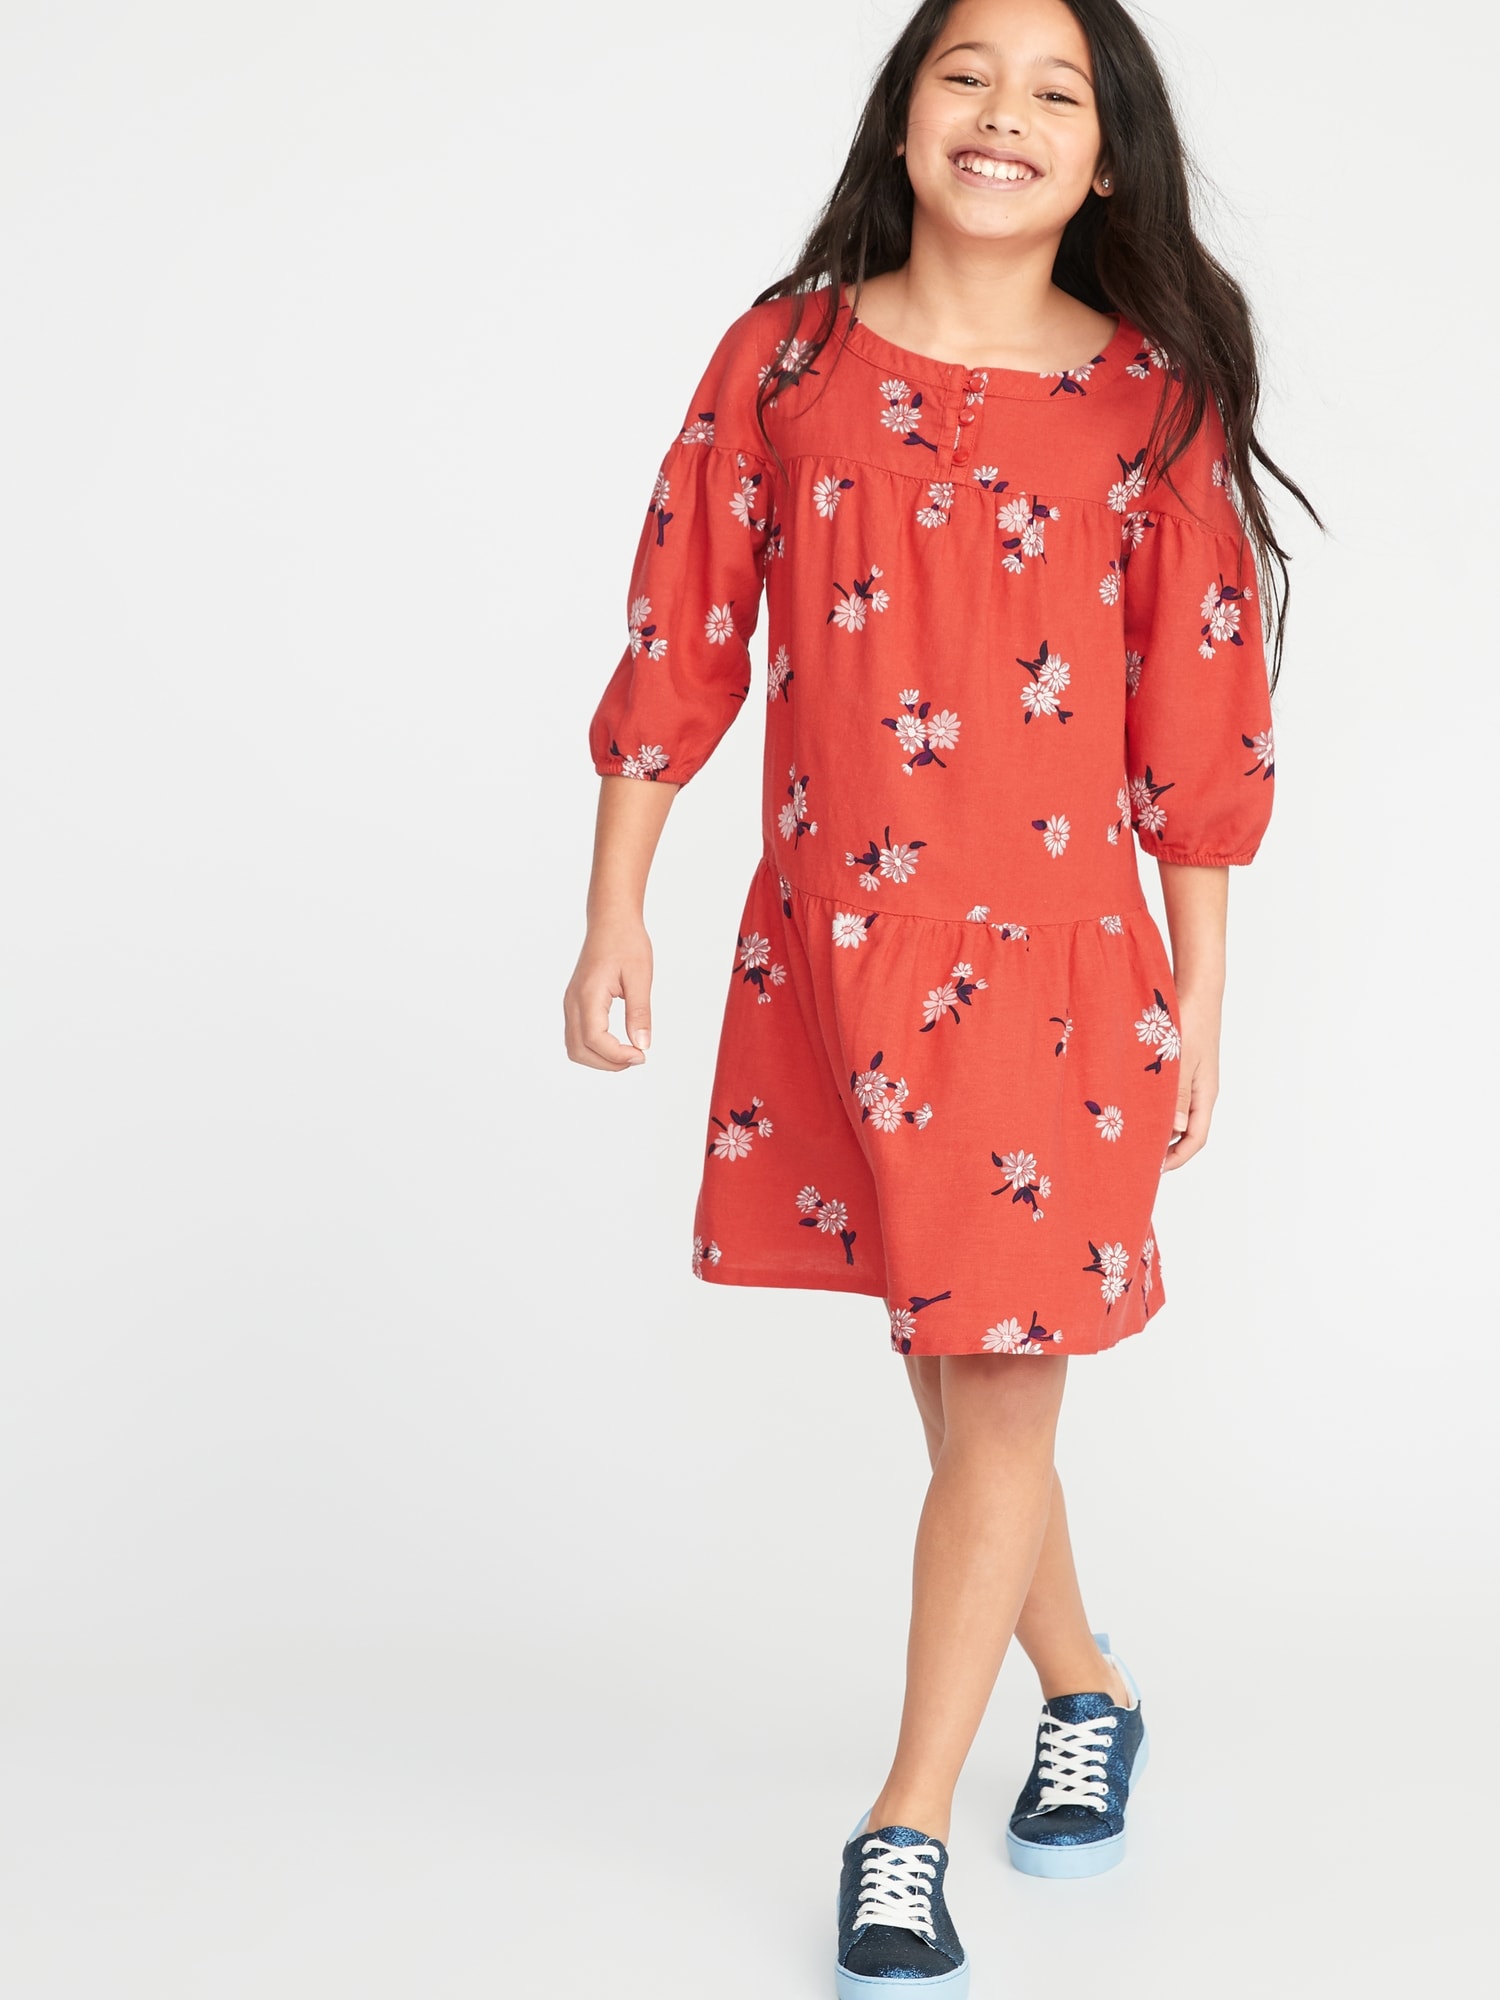 Floral-Print Swing Dress for Girls | Old Navy